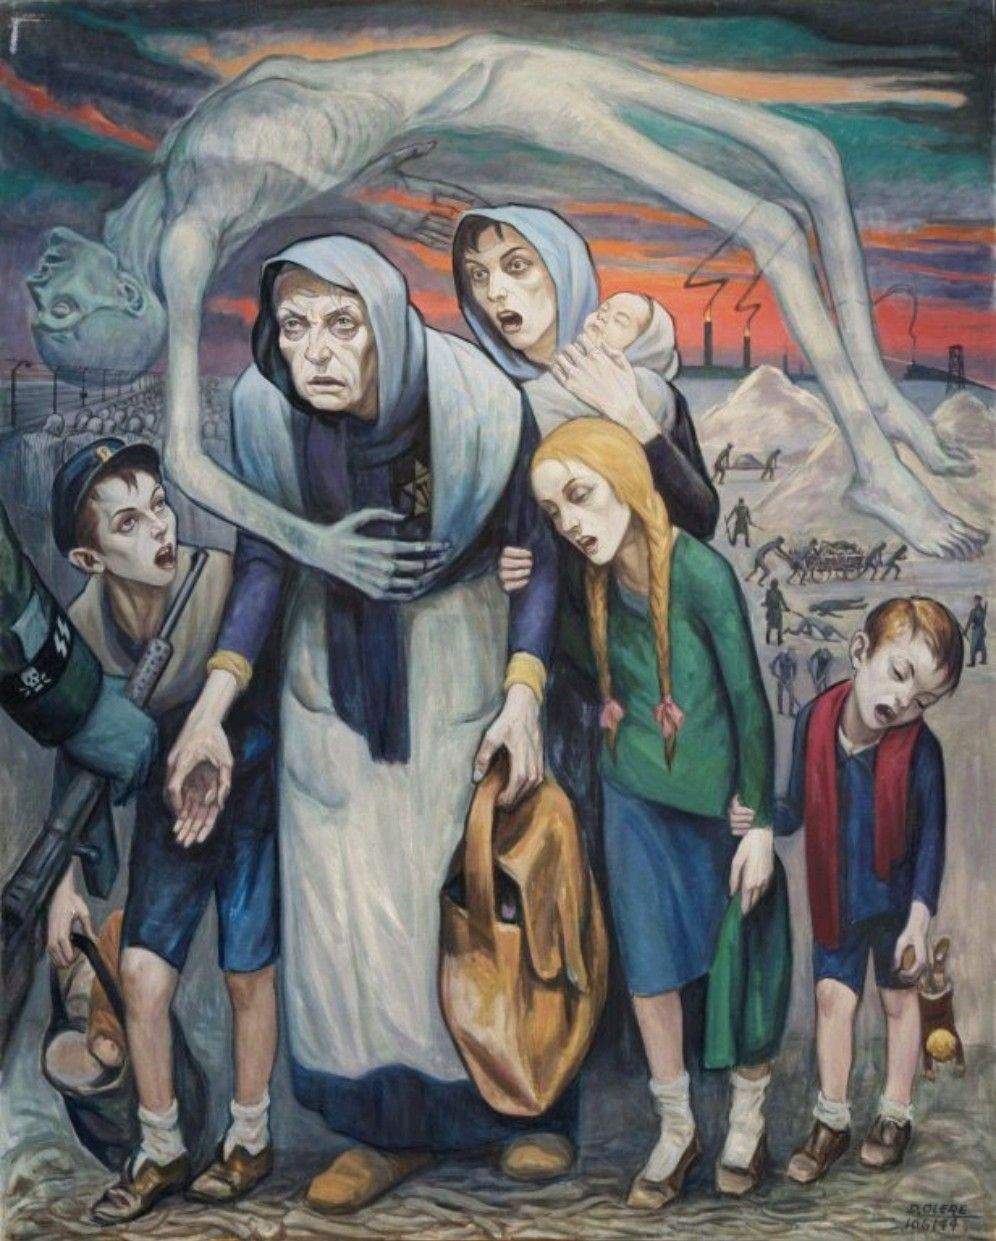 David Olère, Inabili al lavoro (s.d.; tela, 131 x 162 cm; New York, Museum of Jewish Heritage – A Living Memorial to the Holocaust)